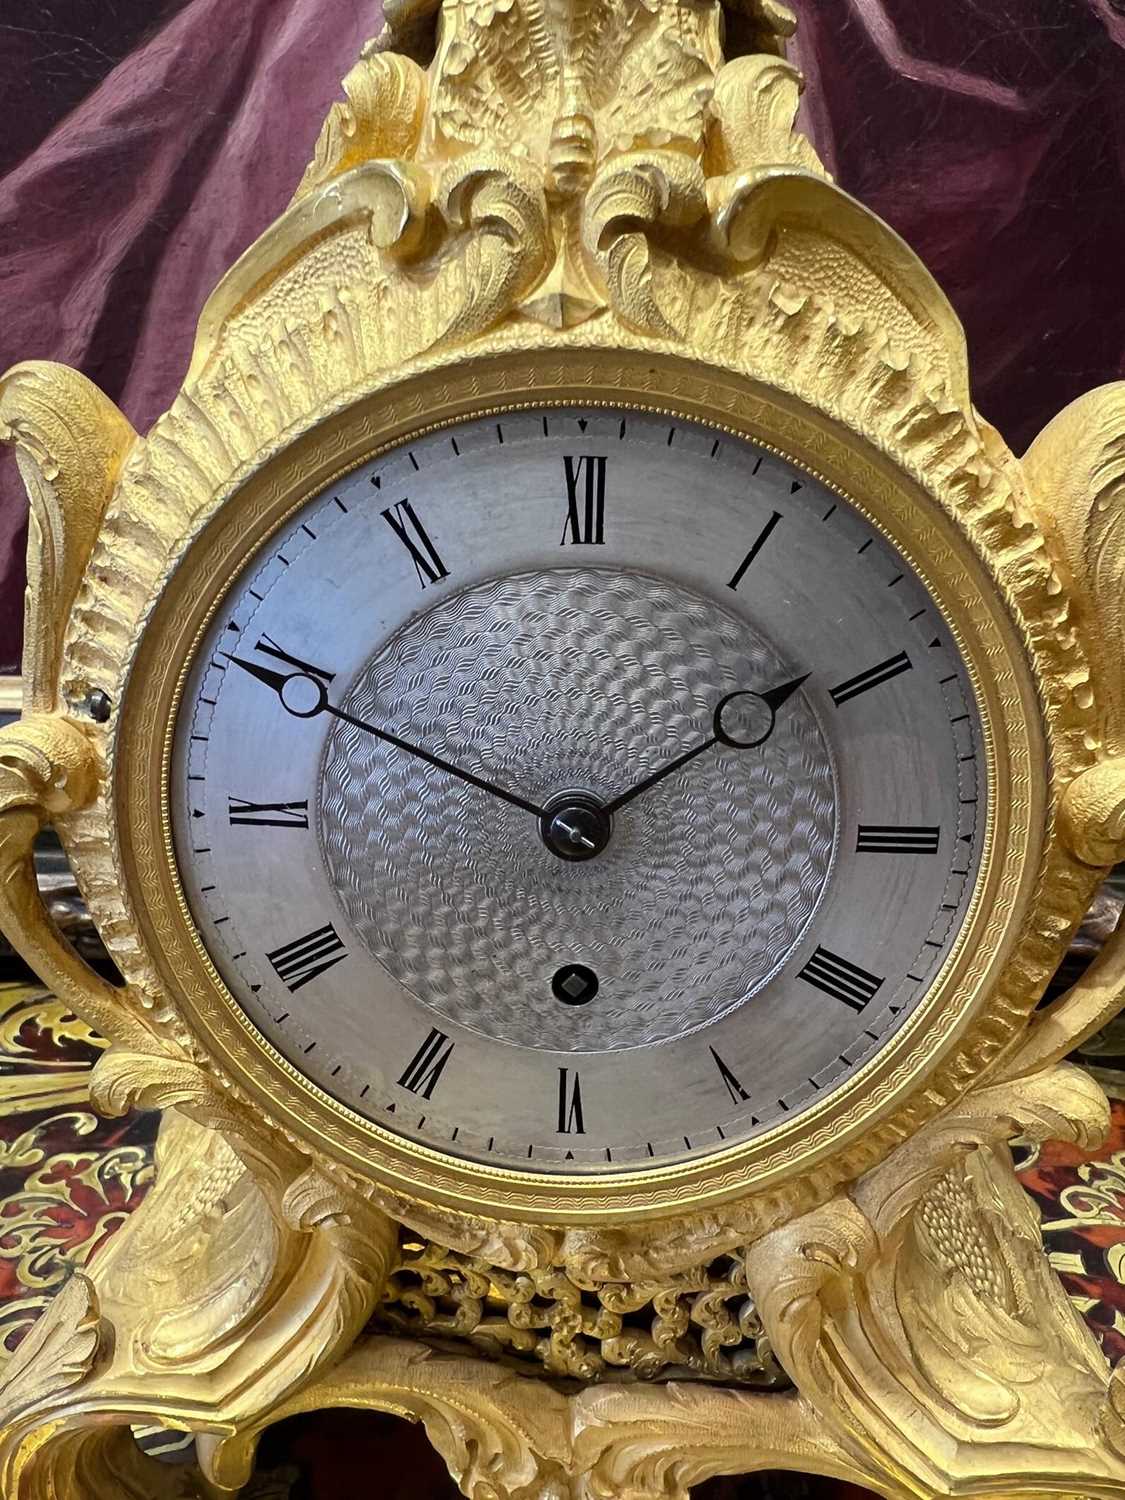 A FINE 1840'S ENGLISH GILT BRONZE MANTEL CLOCK BY HENRY BLUNDELL, LONDON - Image 3 of 12